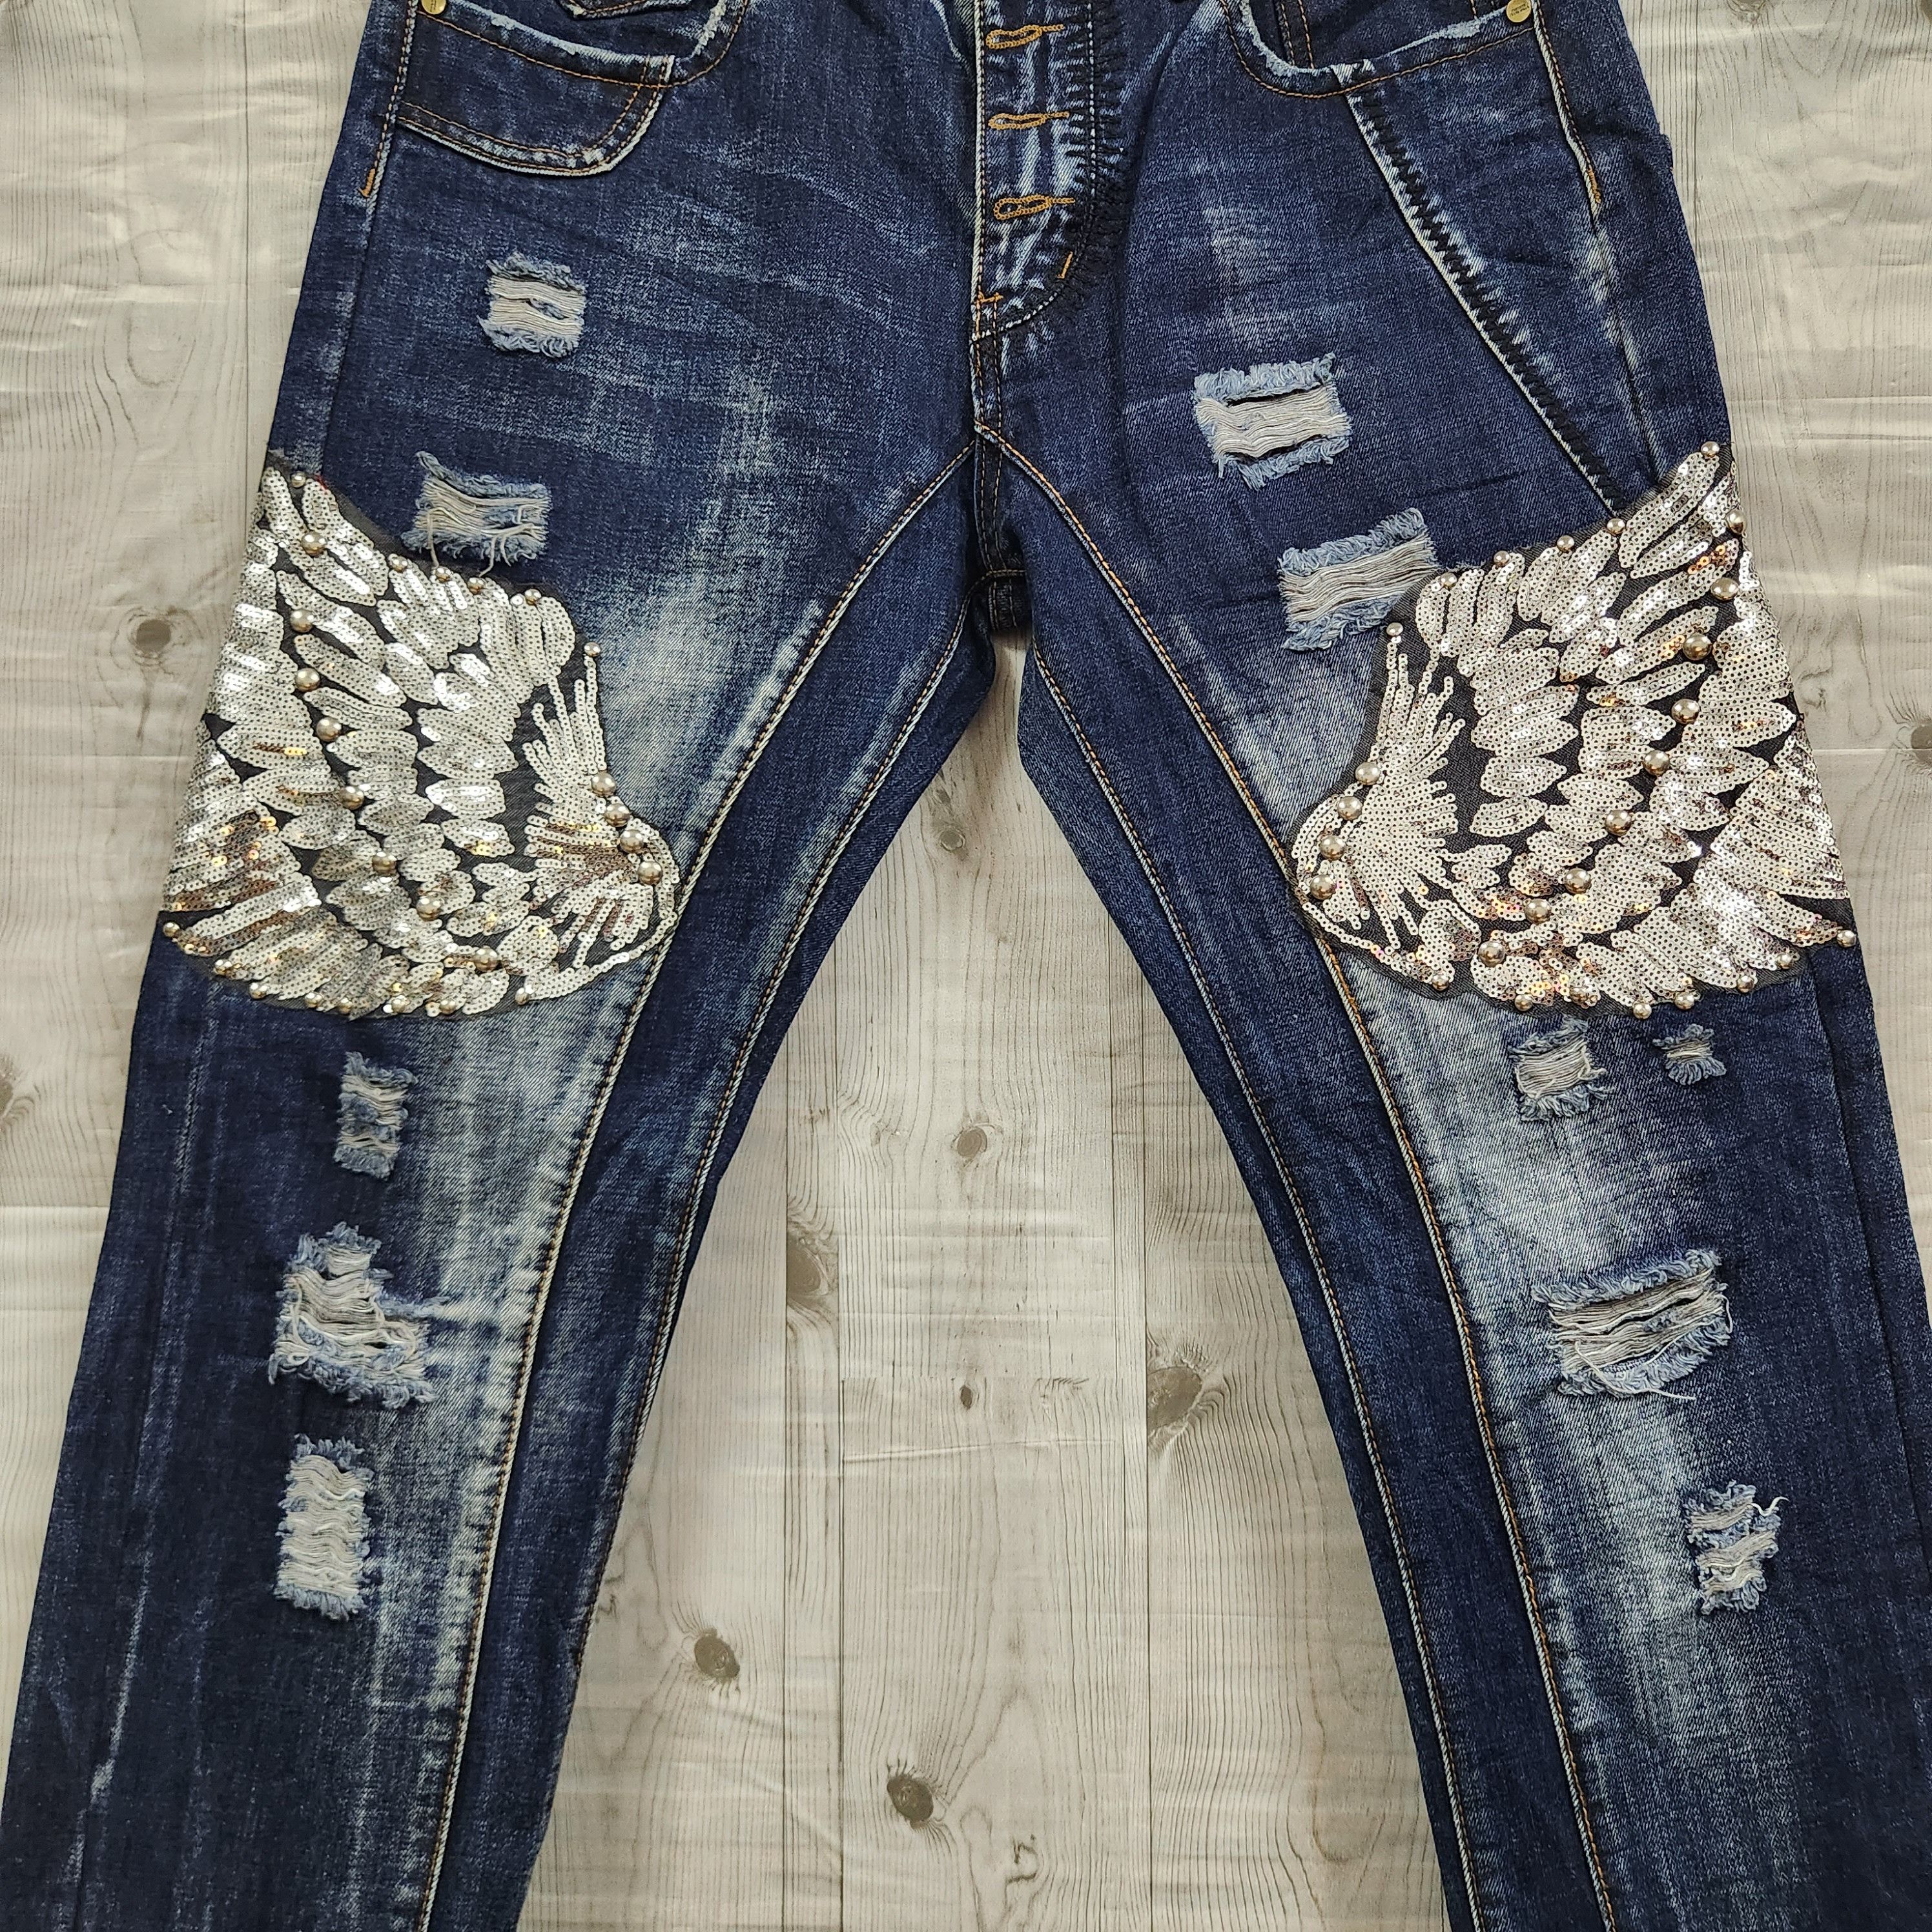 Japanese Brand - Japan Tokyo Denim Double Wings Patches - 3